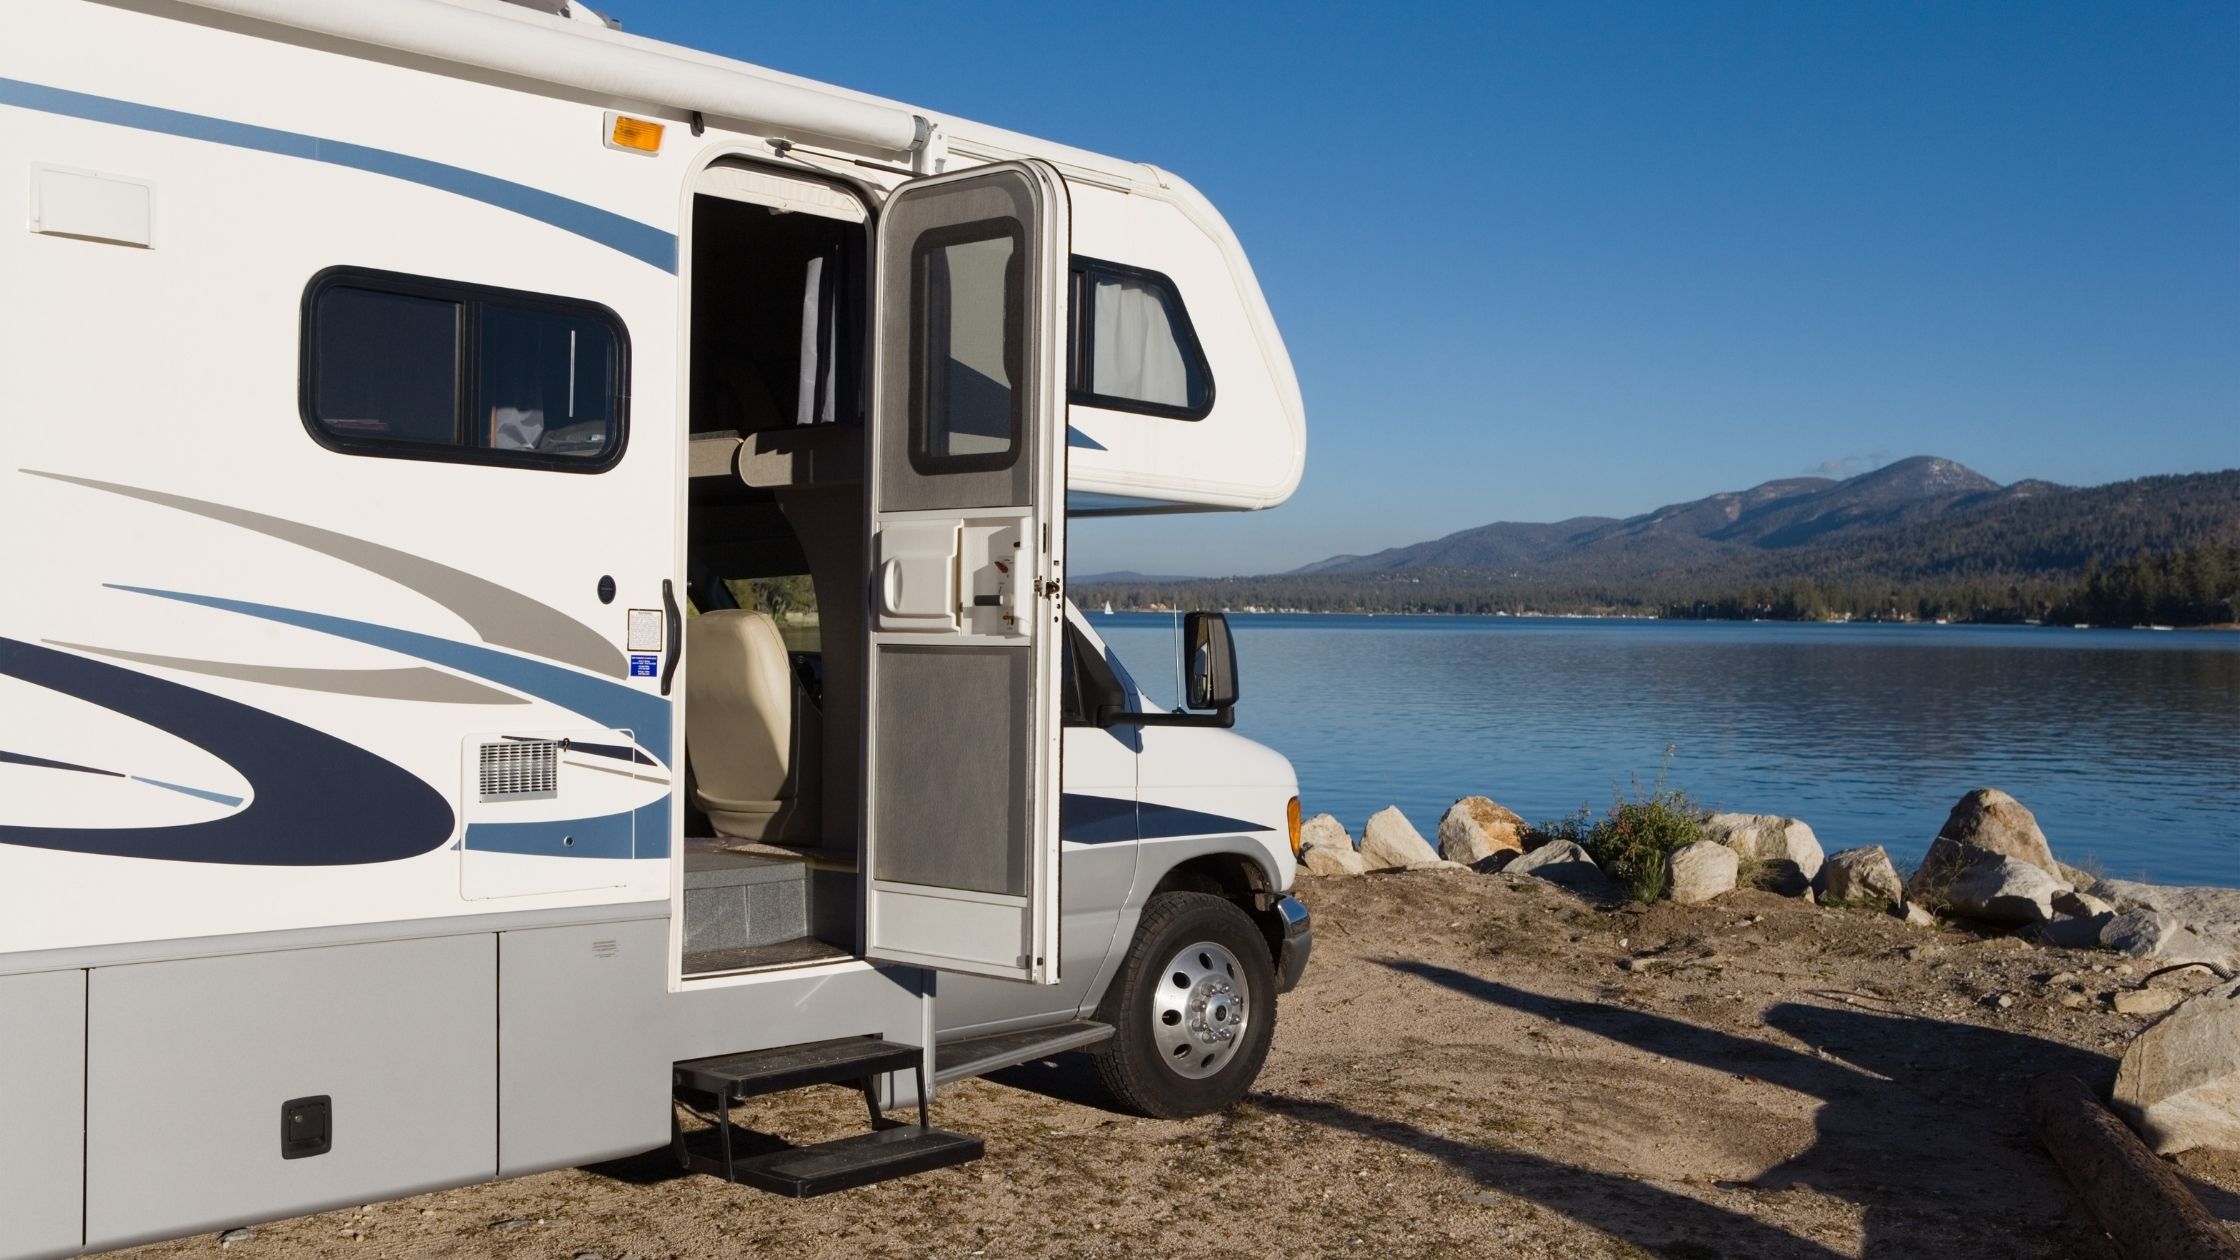 Does Camping World Rent Campers?